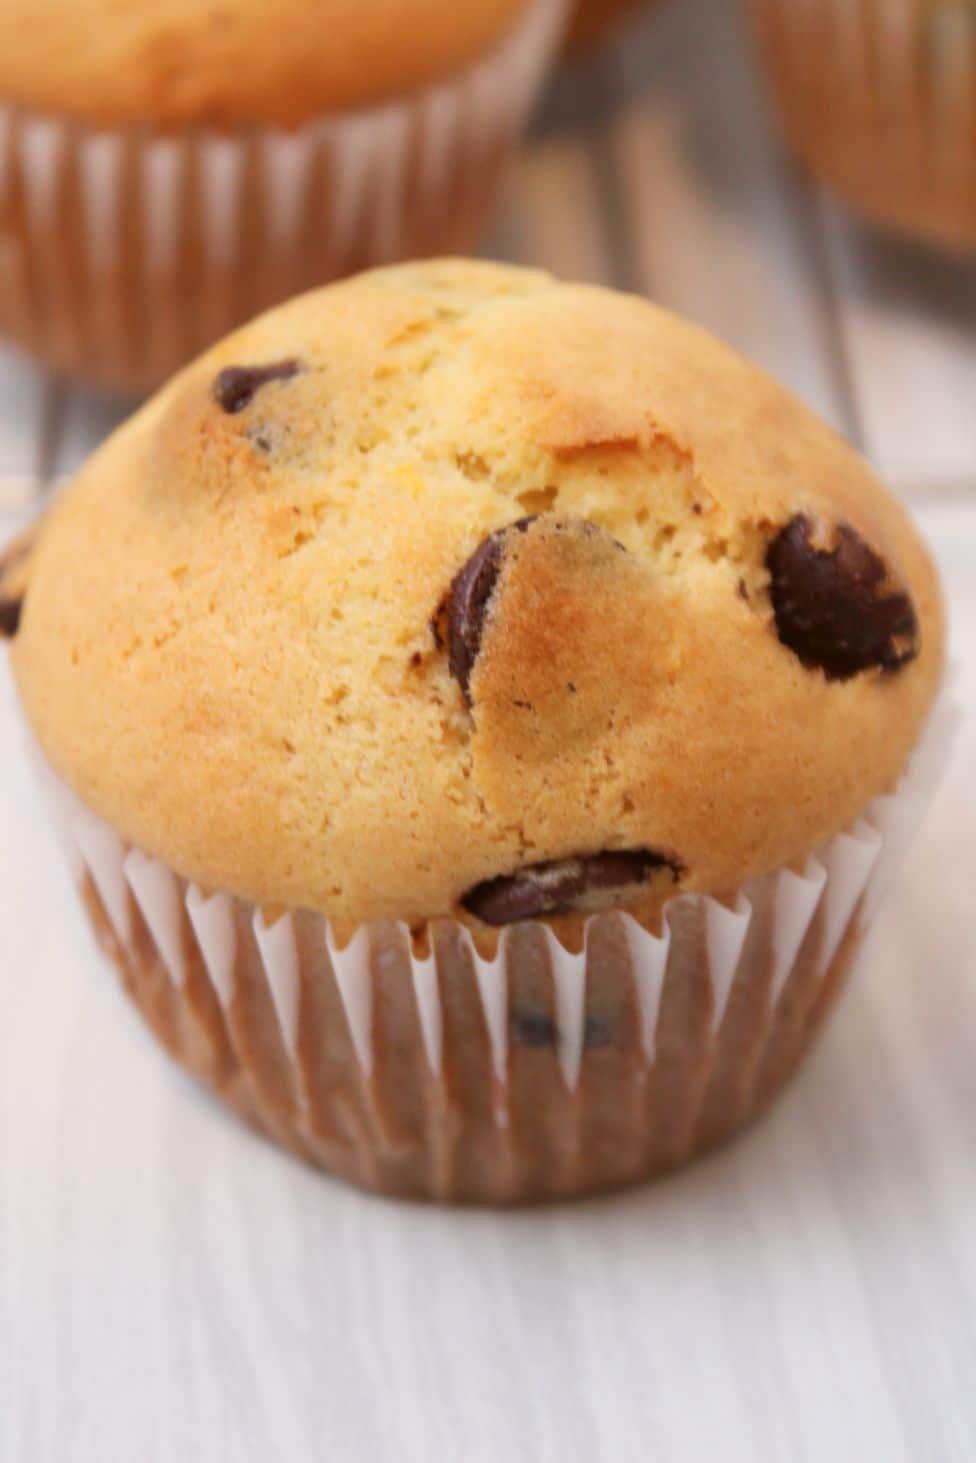 Up close shot of an unglazed muffin with chocolate chips